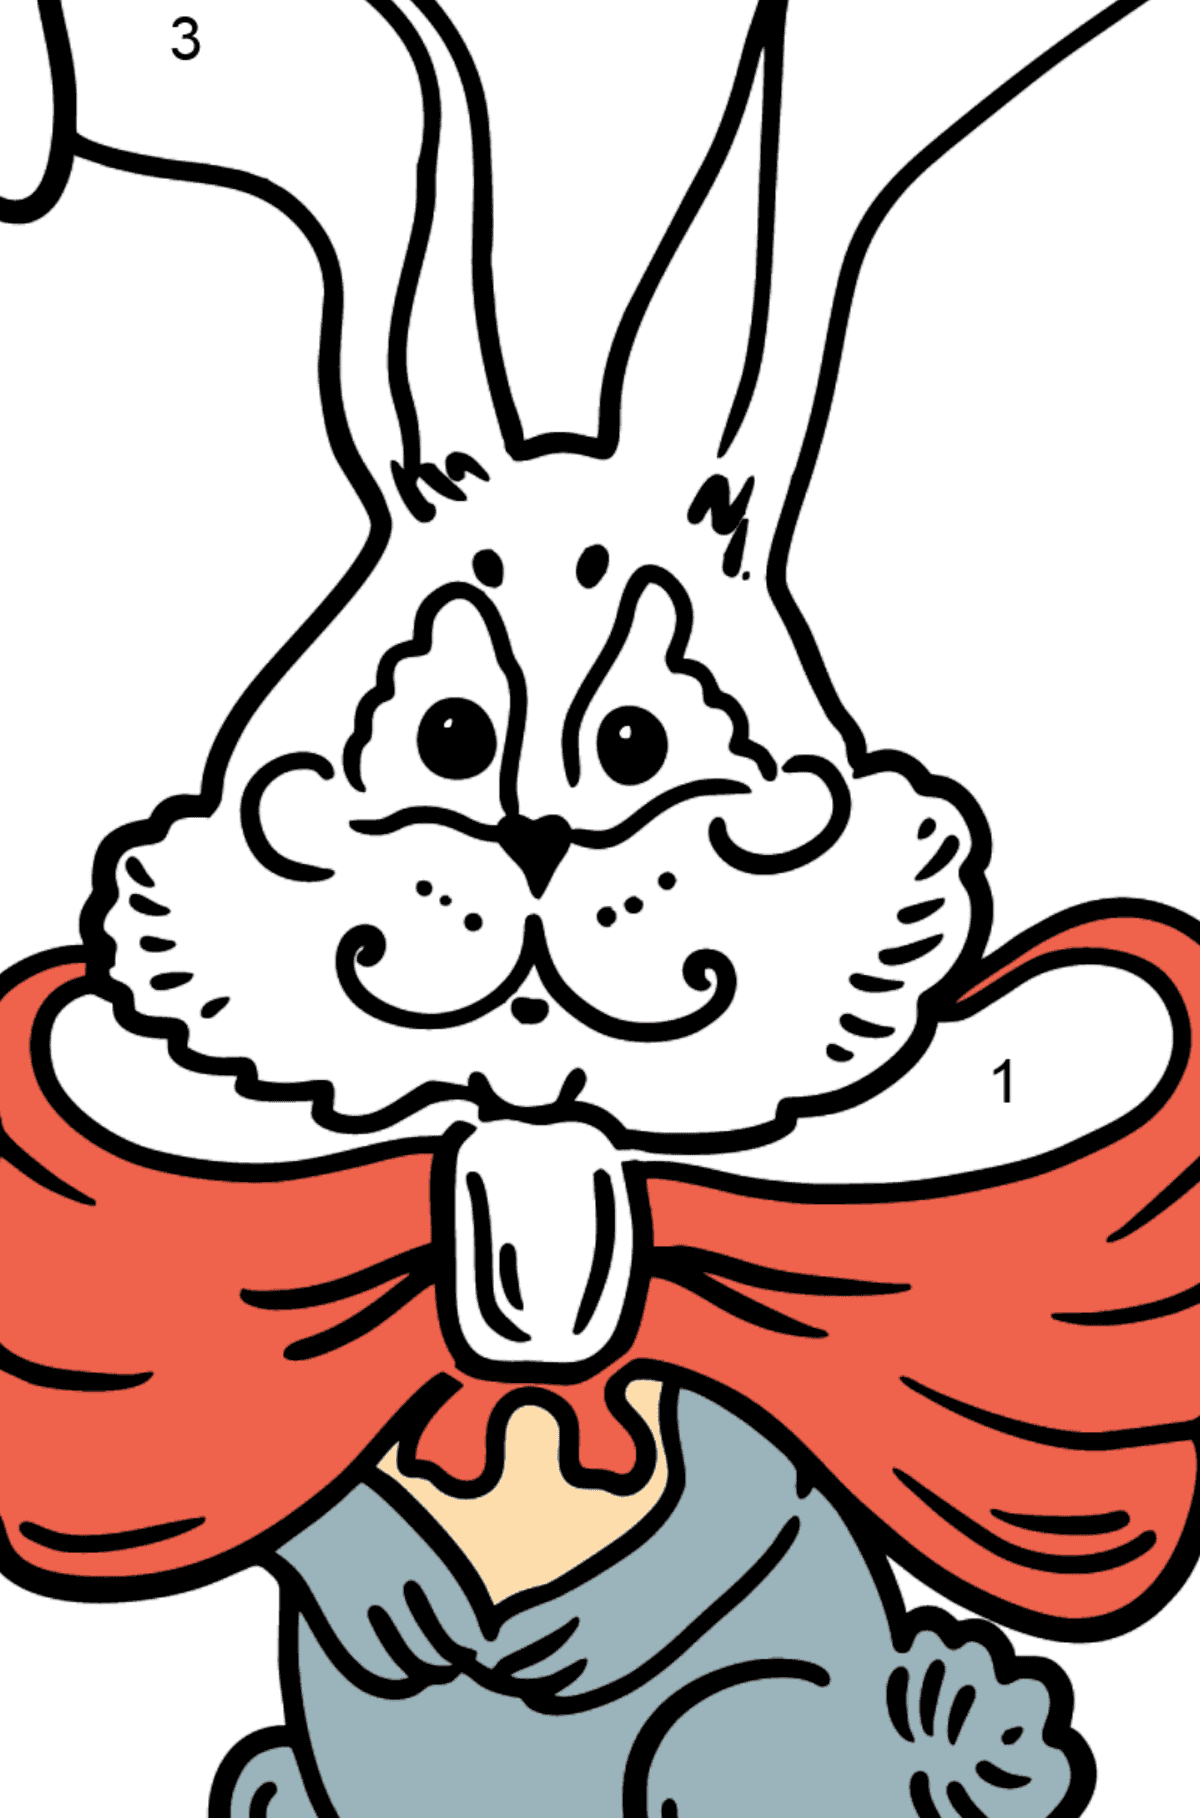 Bunny with a Bow coloring page - Coloring by Numbers for Kids